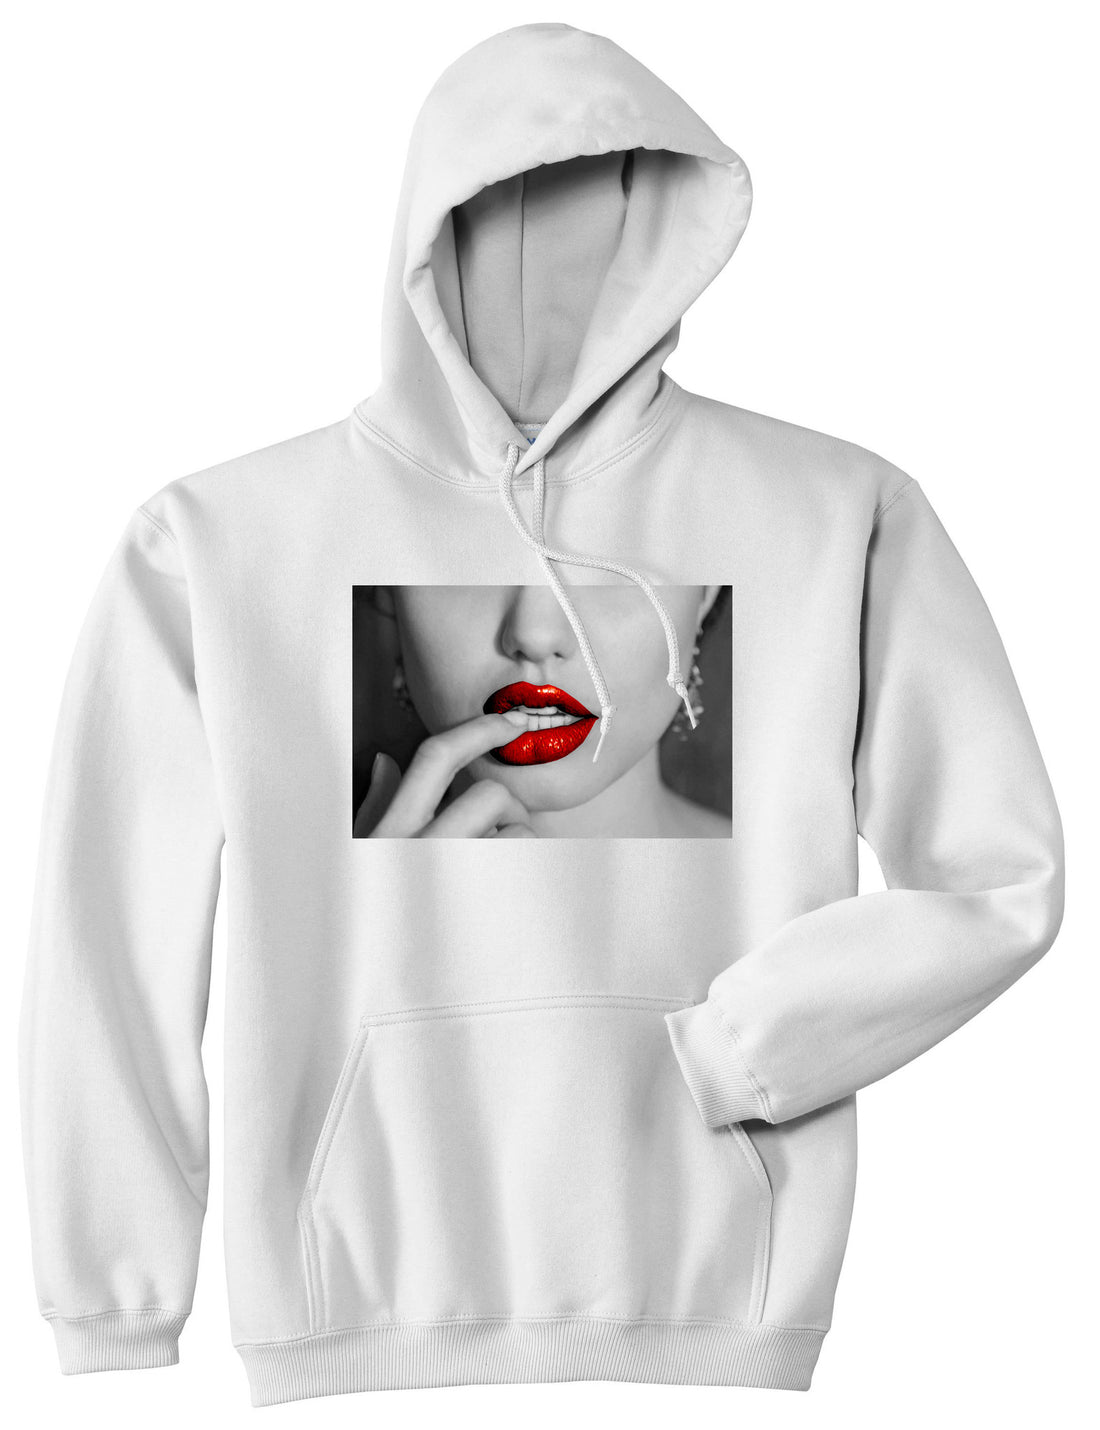  Angelina Red by Kings Of NY Lips Jolie Sexy Hot Picture Boys Kids Pullover Hoodie Hoody in White by Kings Of NY